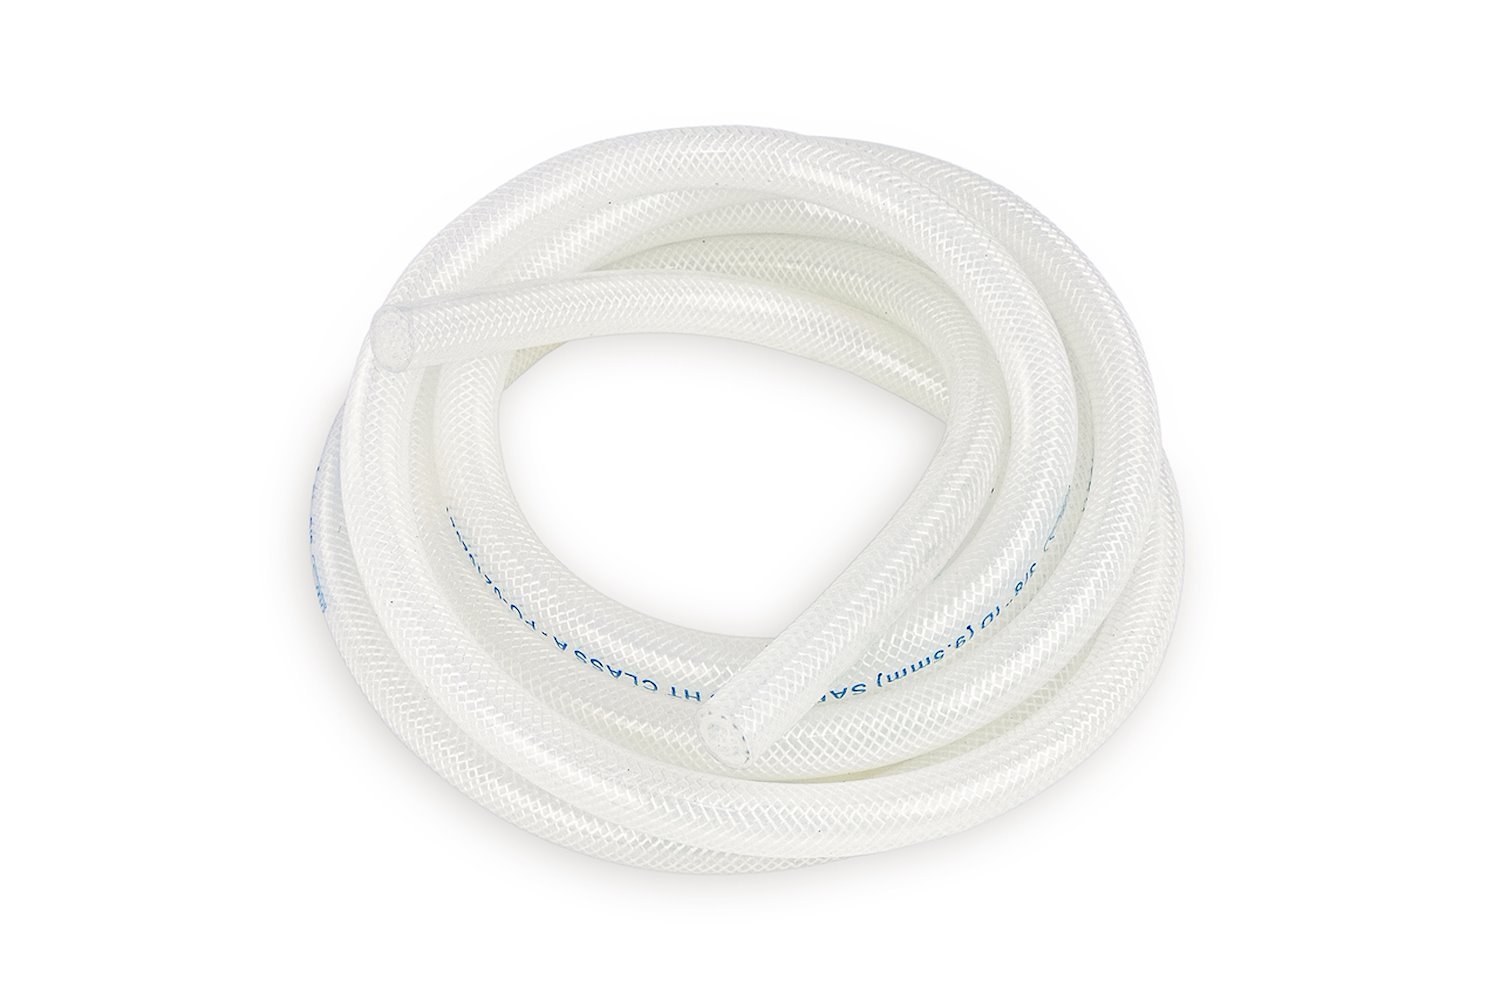 HTHH-100-CLEARx10 Silicone Heater Hose Tubing, High-Temp 1-Ply Reinforced, 1 in. ID, 10 ft. Roll, Clear